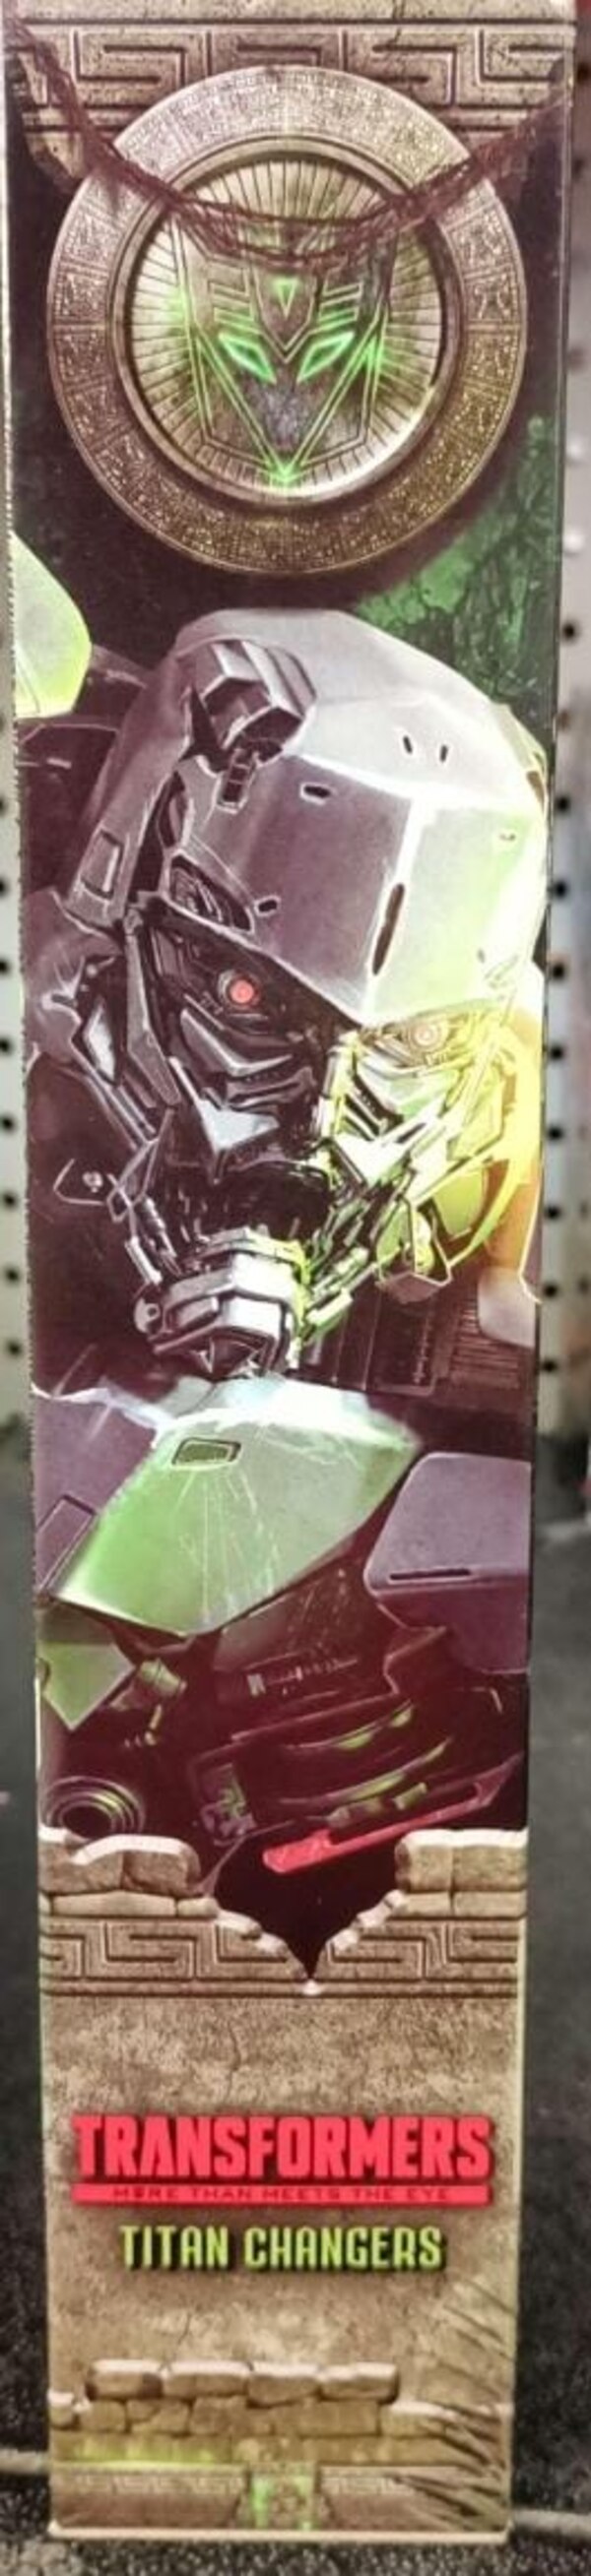 Transformers Rise Of The Beasts Megatron Boxart Reveals Decepticon Leader Image  (3 of 4)